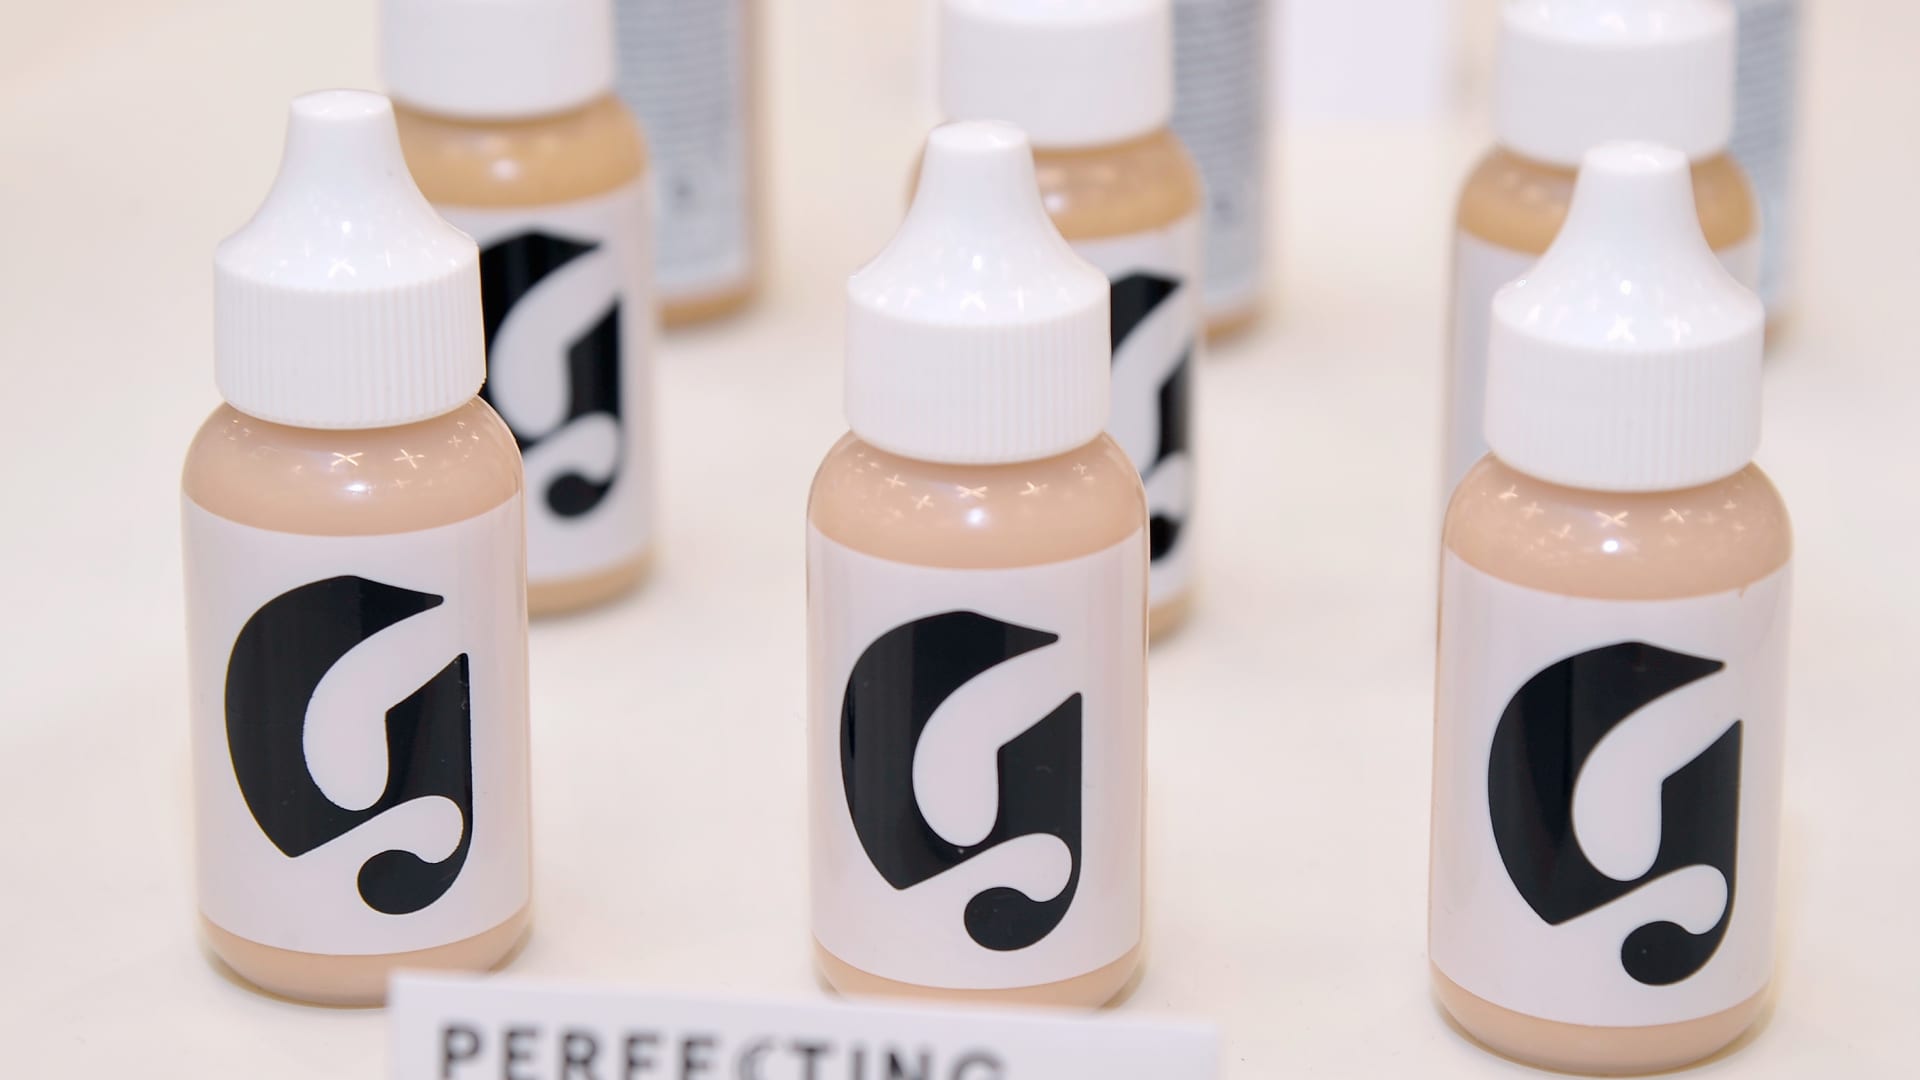 Glossier to sell in Sephora, makeup brand’s first retail partner